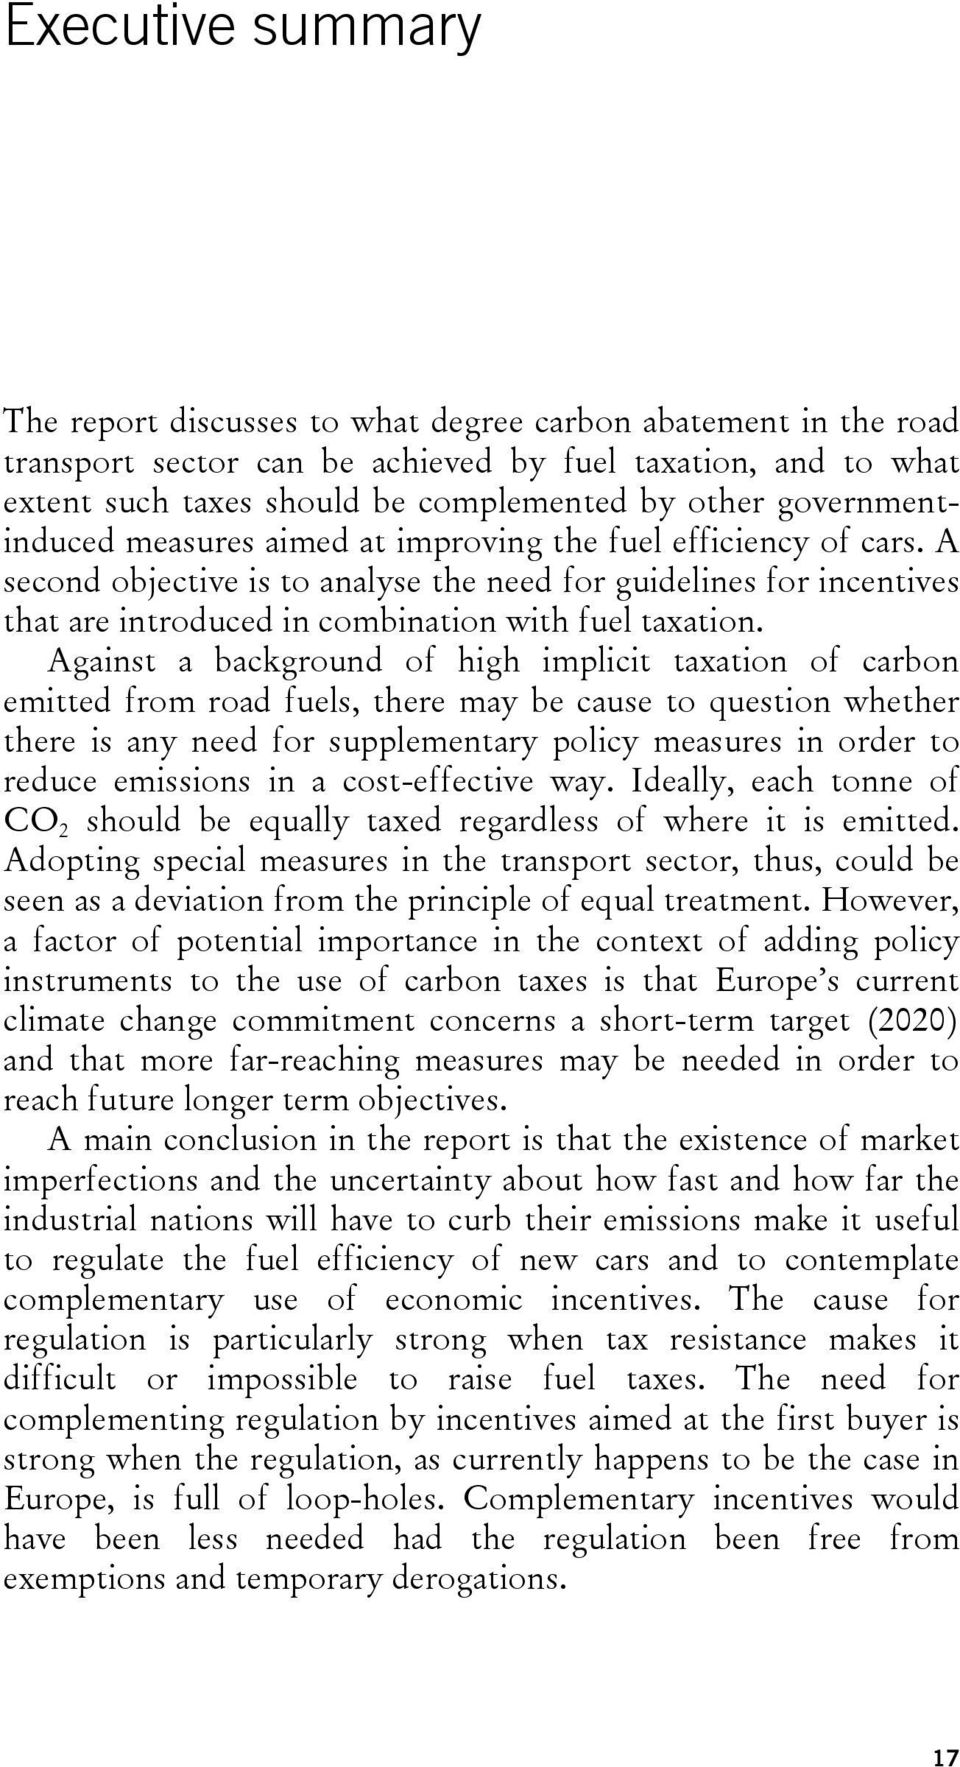 A second objective is to analyse the need for guidelines for incentives that are introduced in combination with fuel taxation.